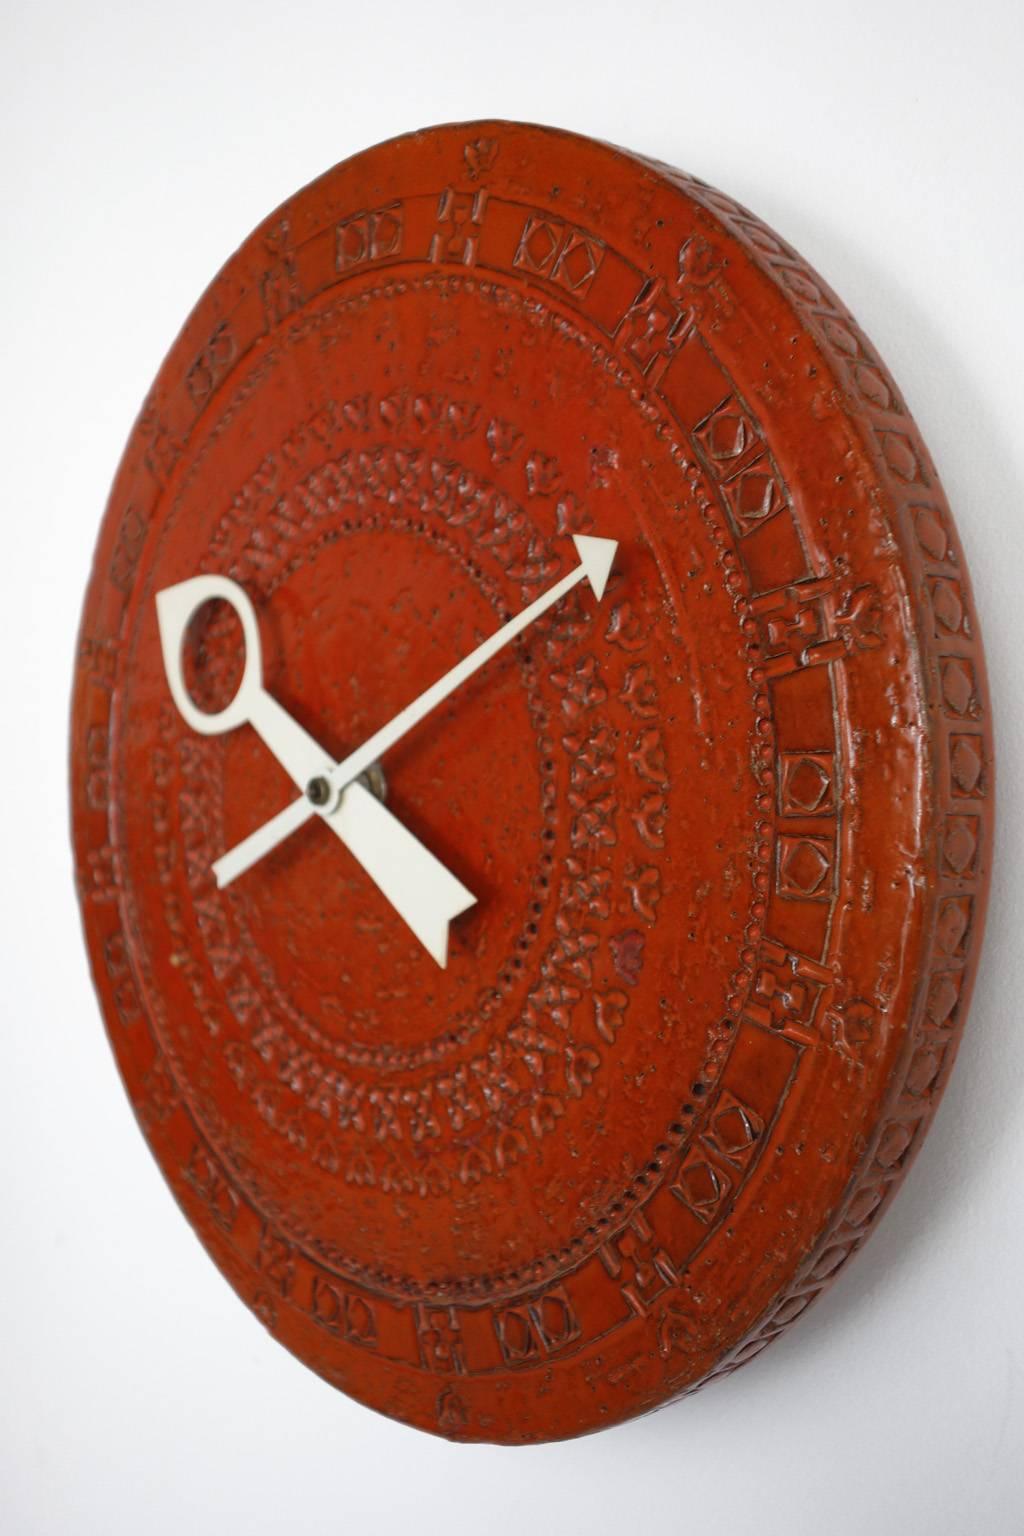 Striking Bitossi ceramic wall clock by Howard Miller and designed by George Nelson. All original condition.